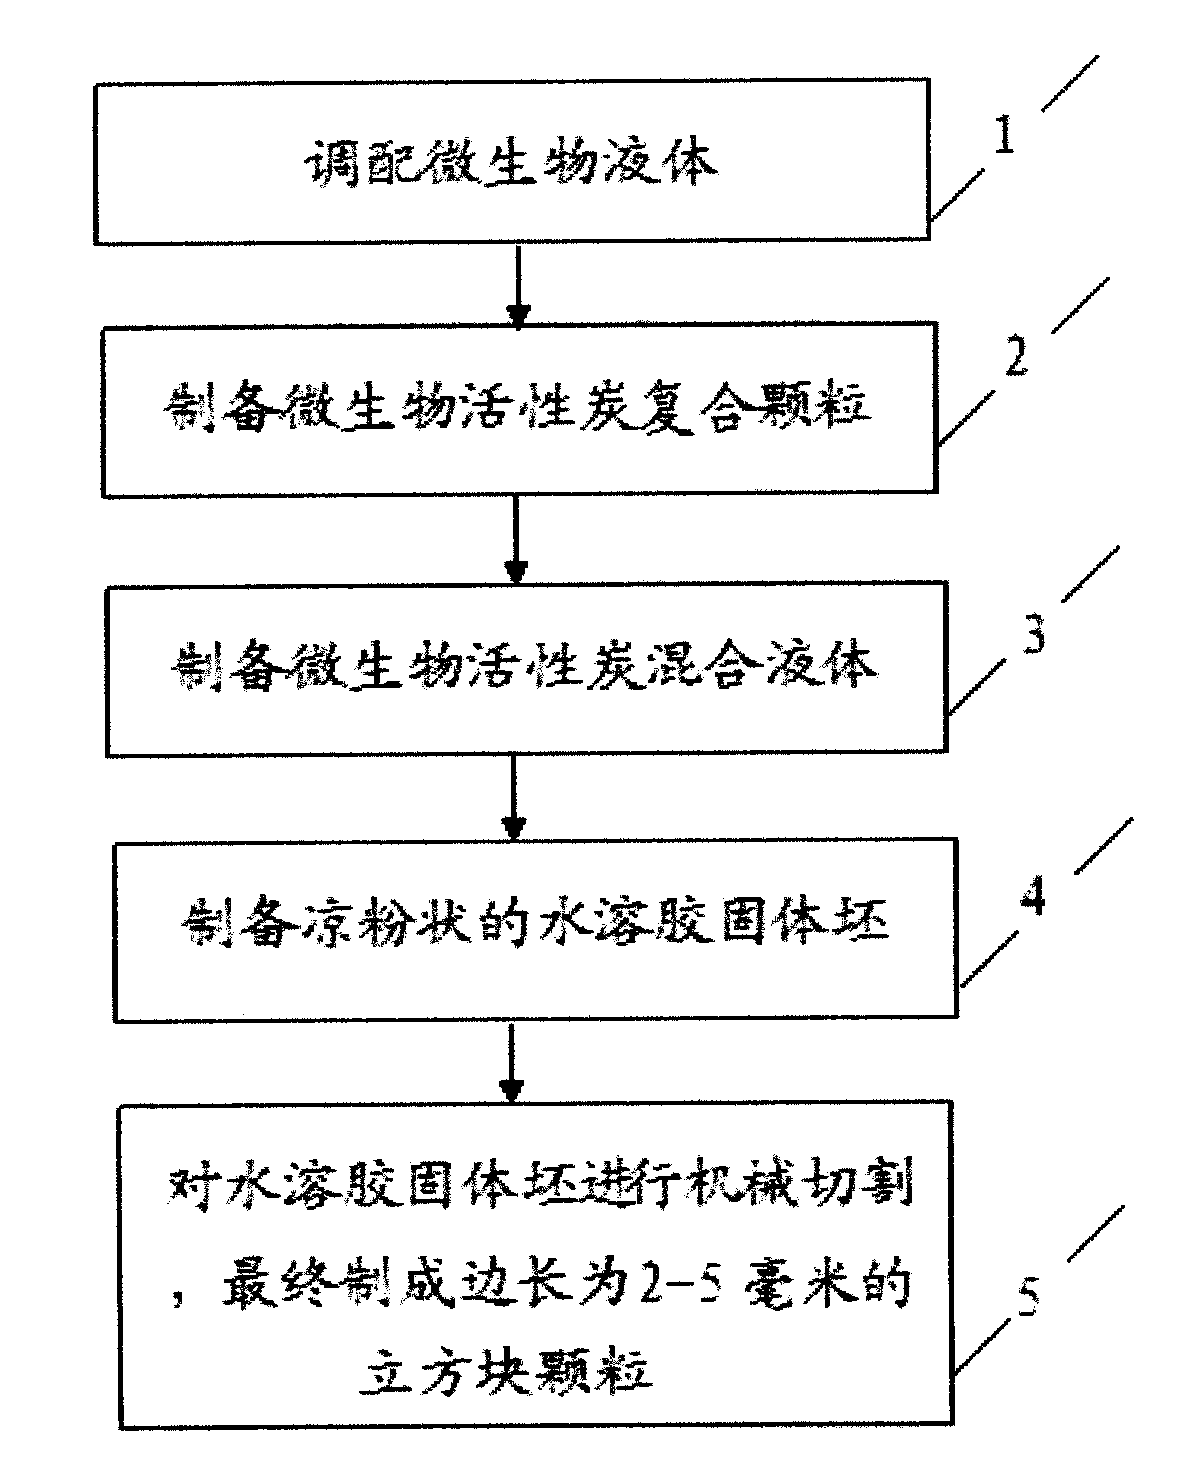 Suspension biological activated carbon particle vector and preparation method thereof